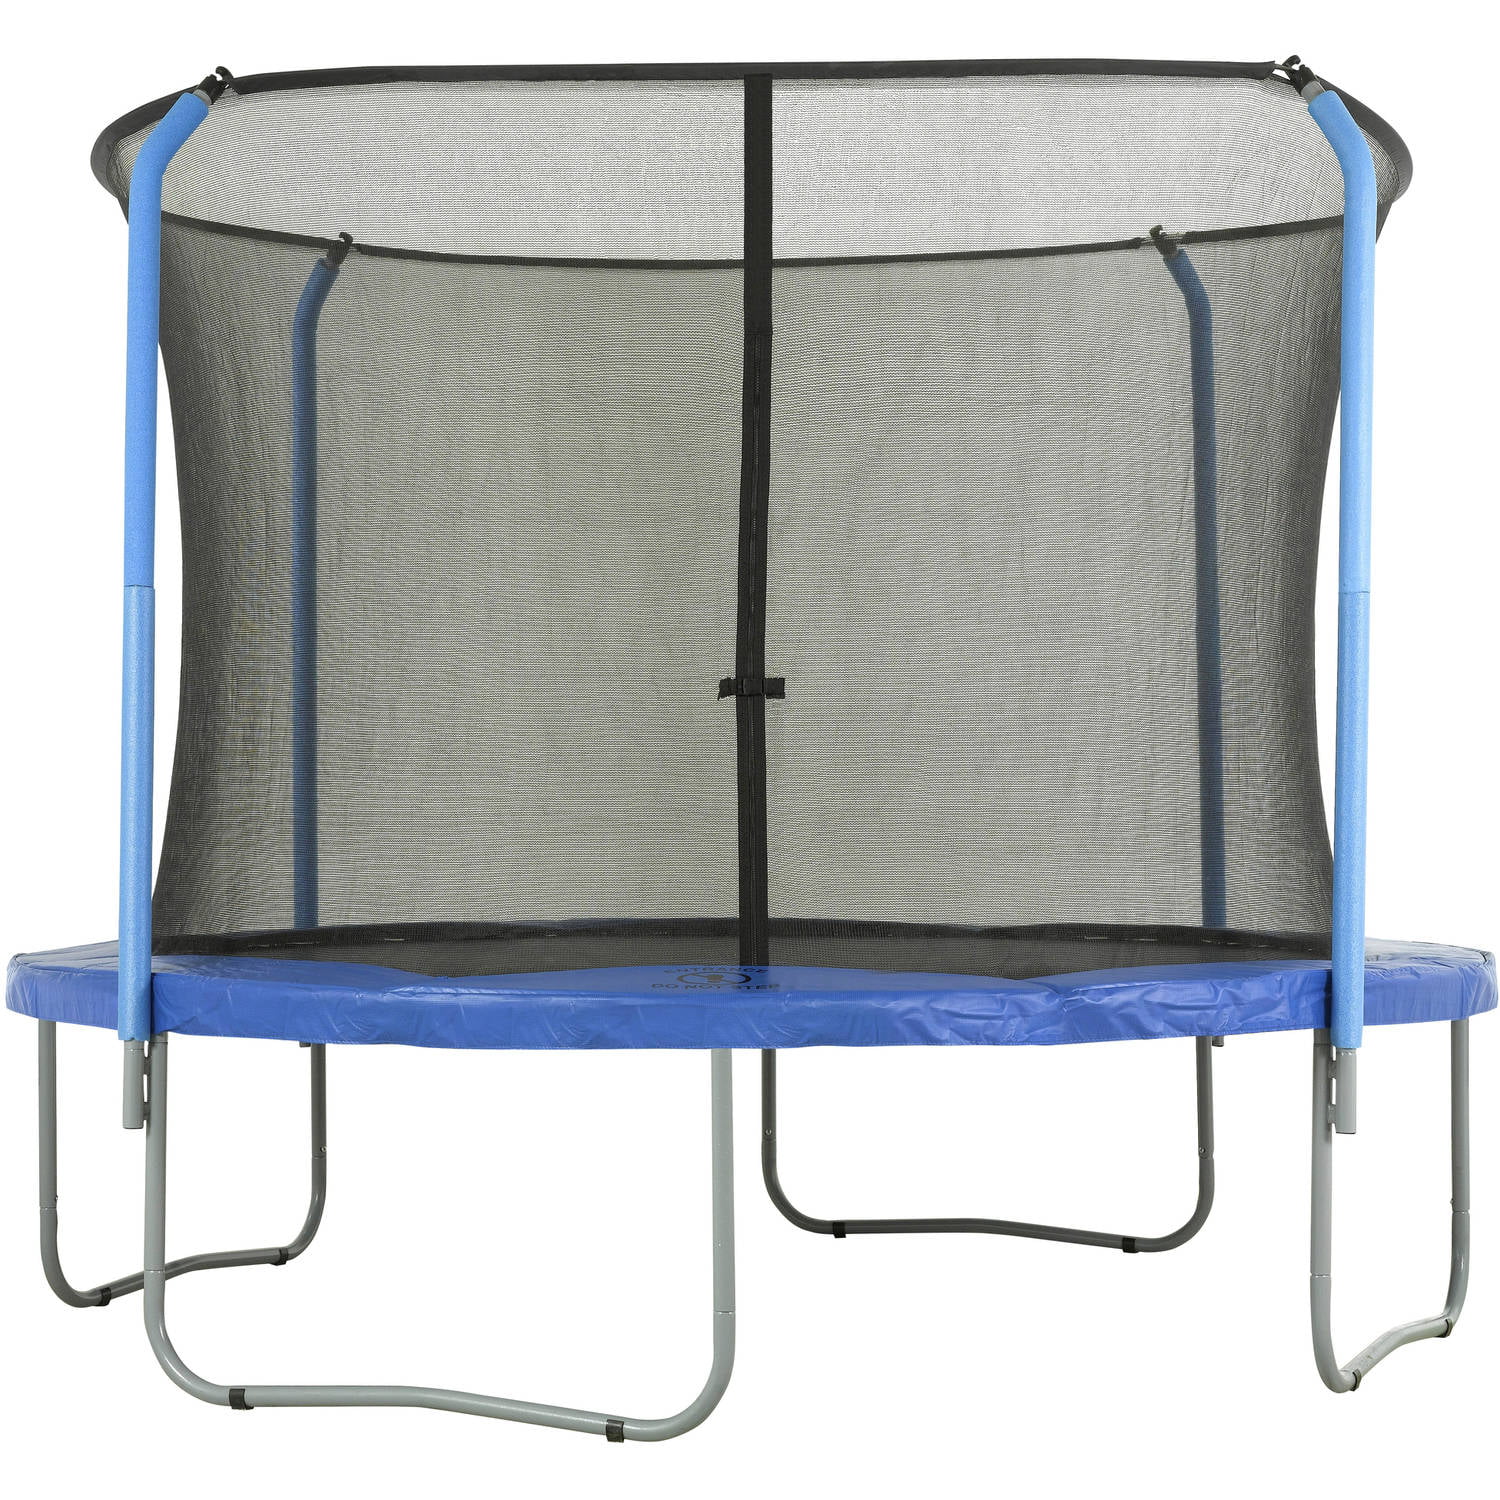 14 Trampoline Enclosure Safety Net Replacement 